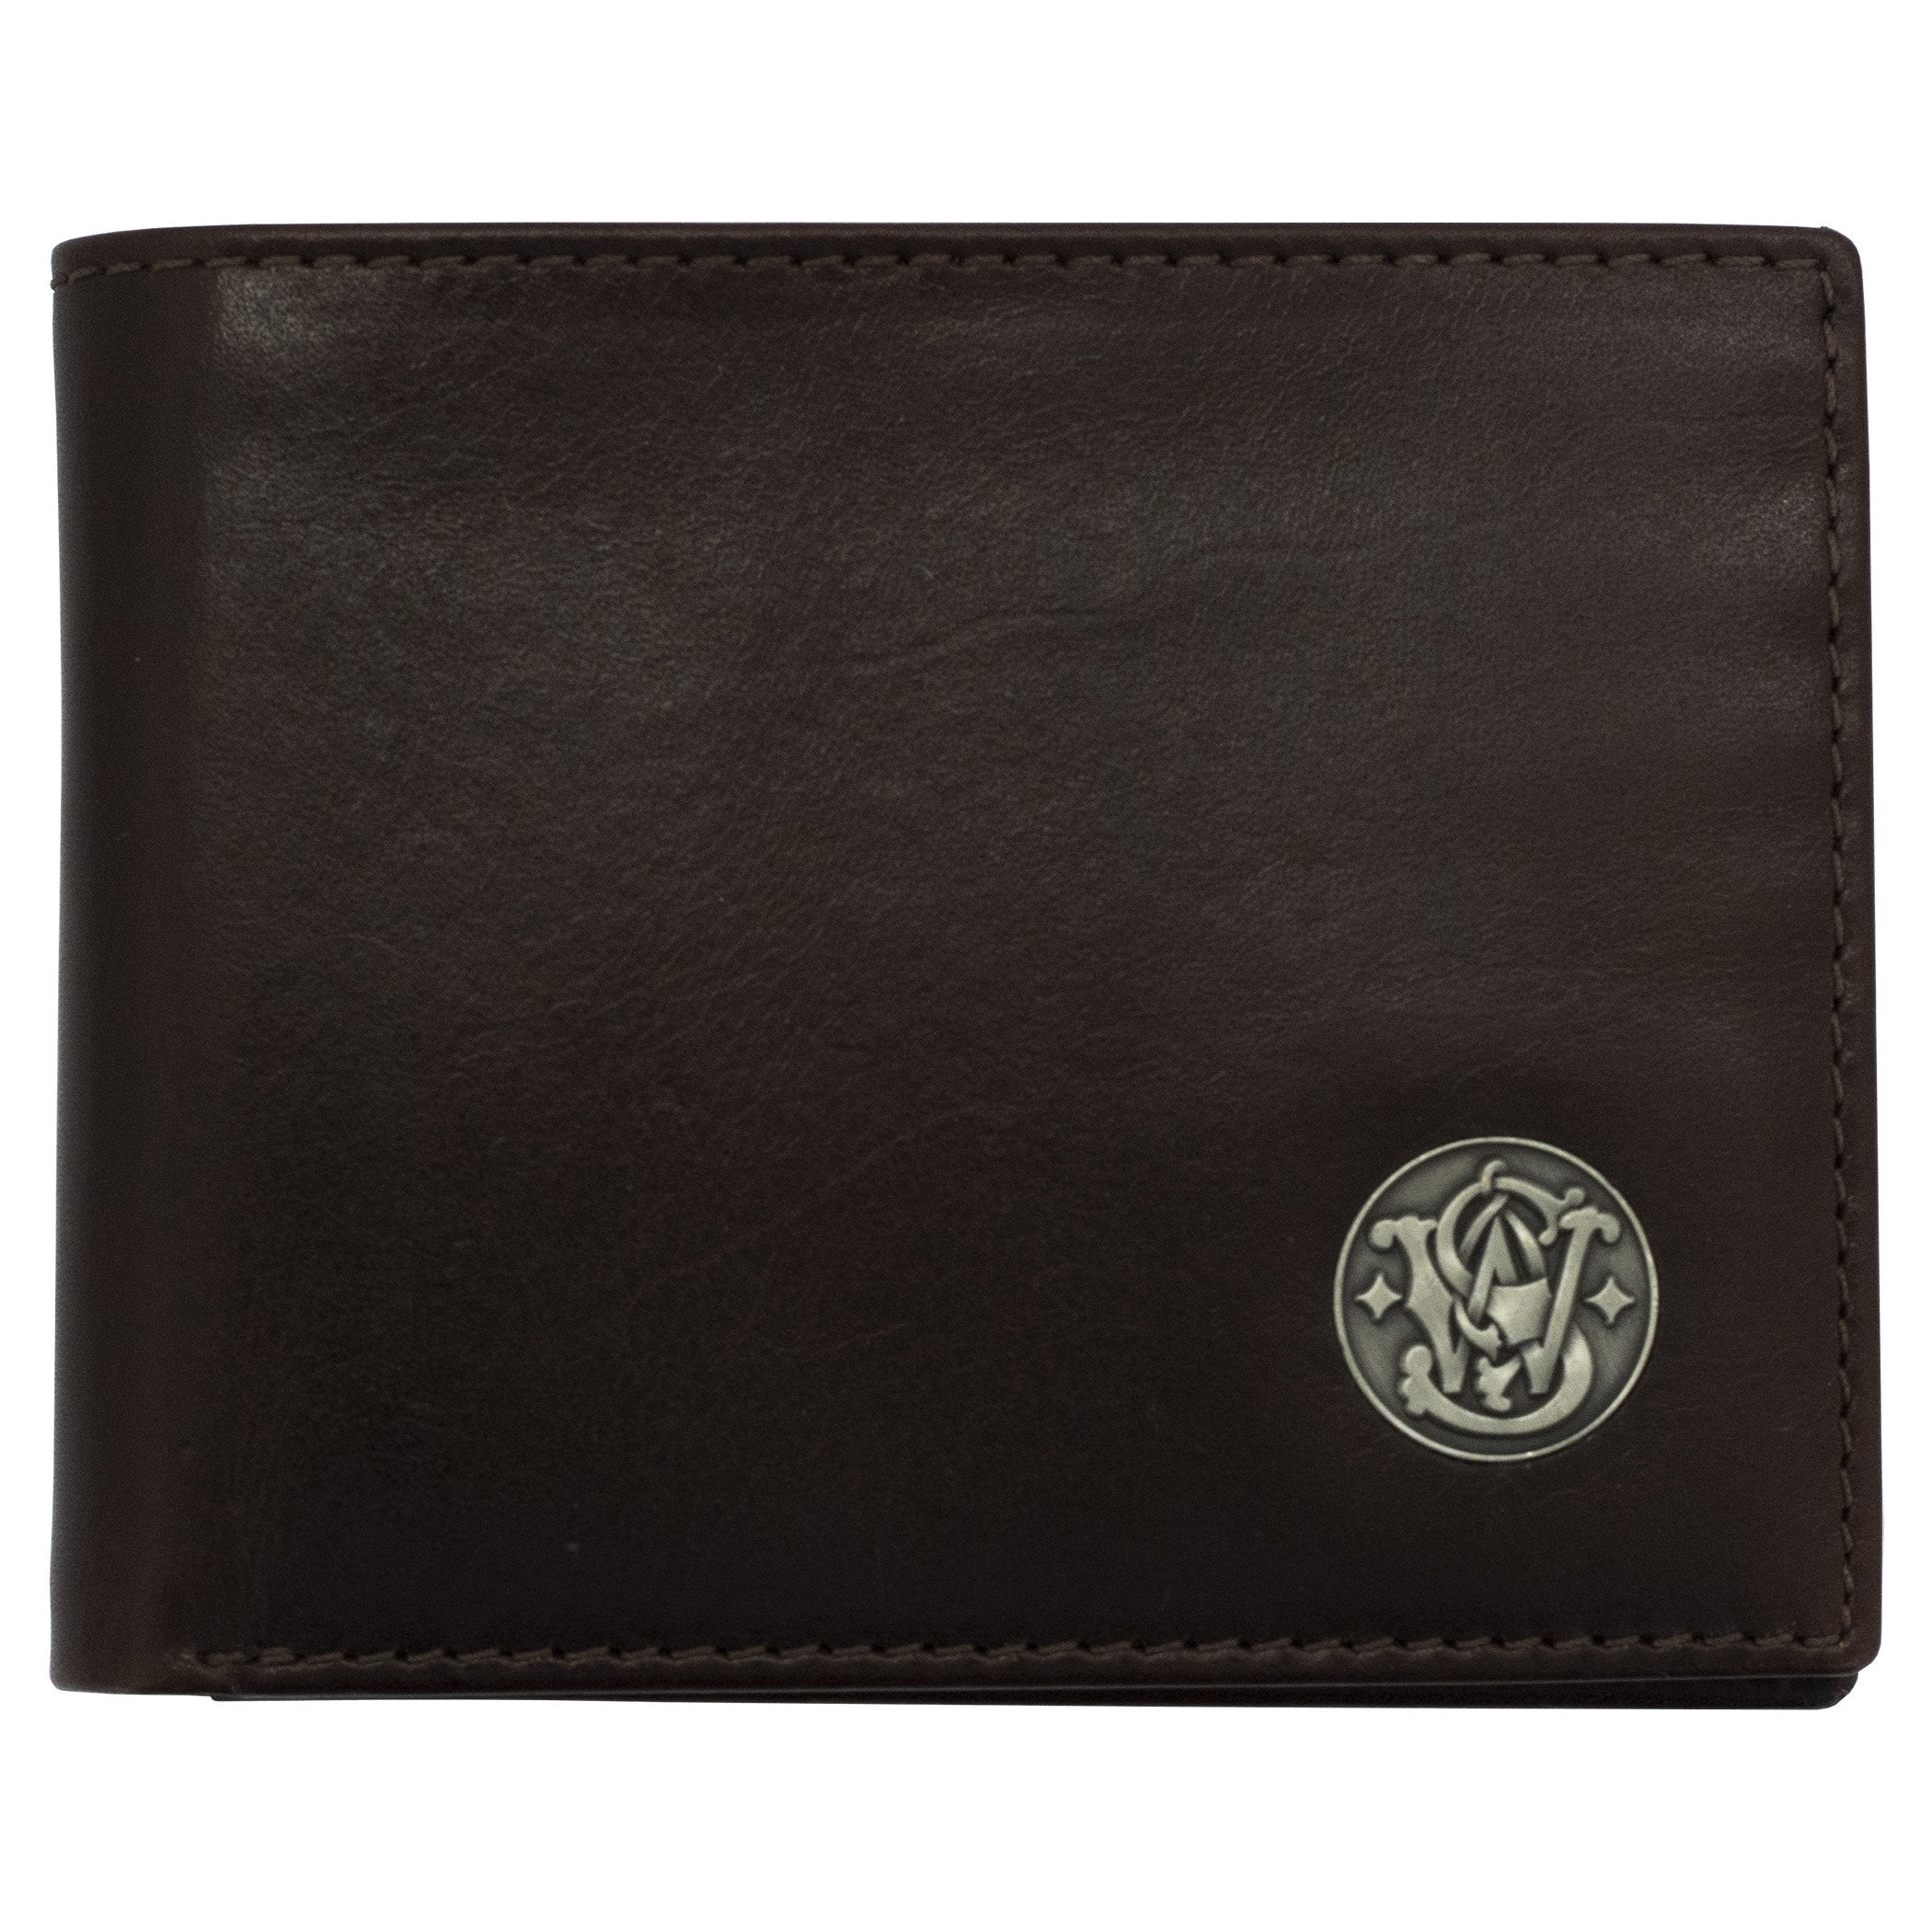 Smith & Wesson Bifold Wallet – RuggedRare